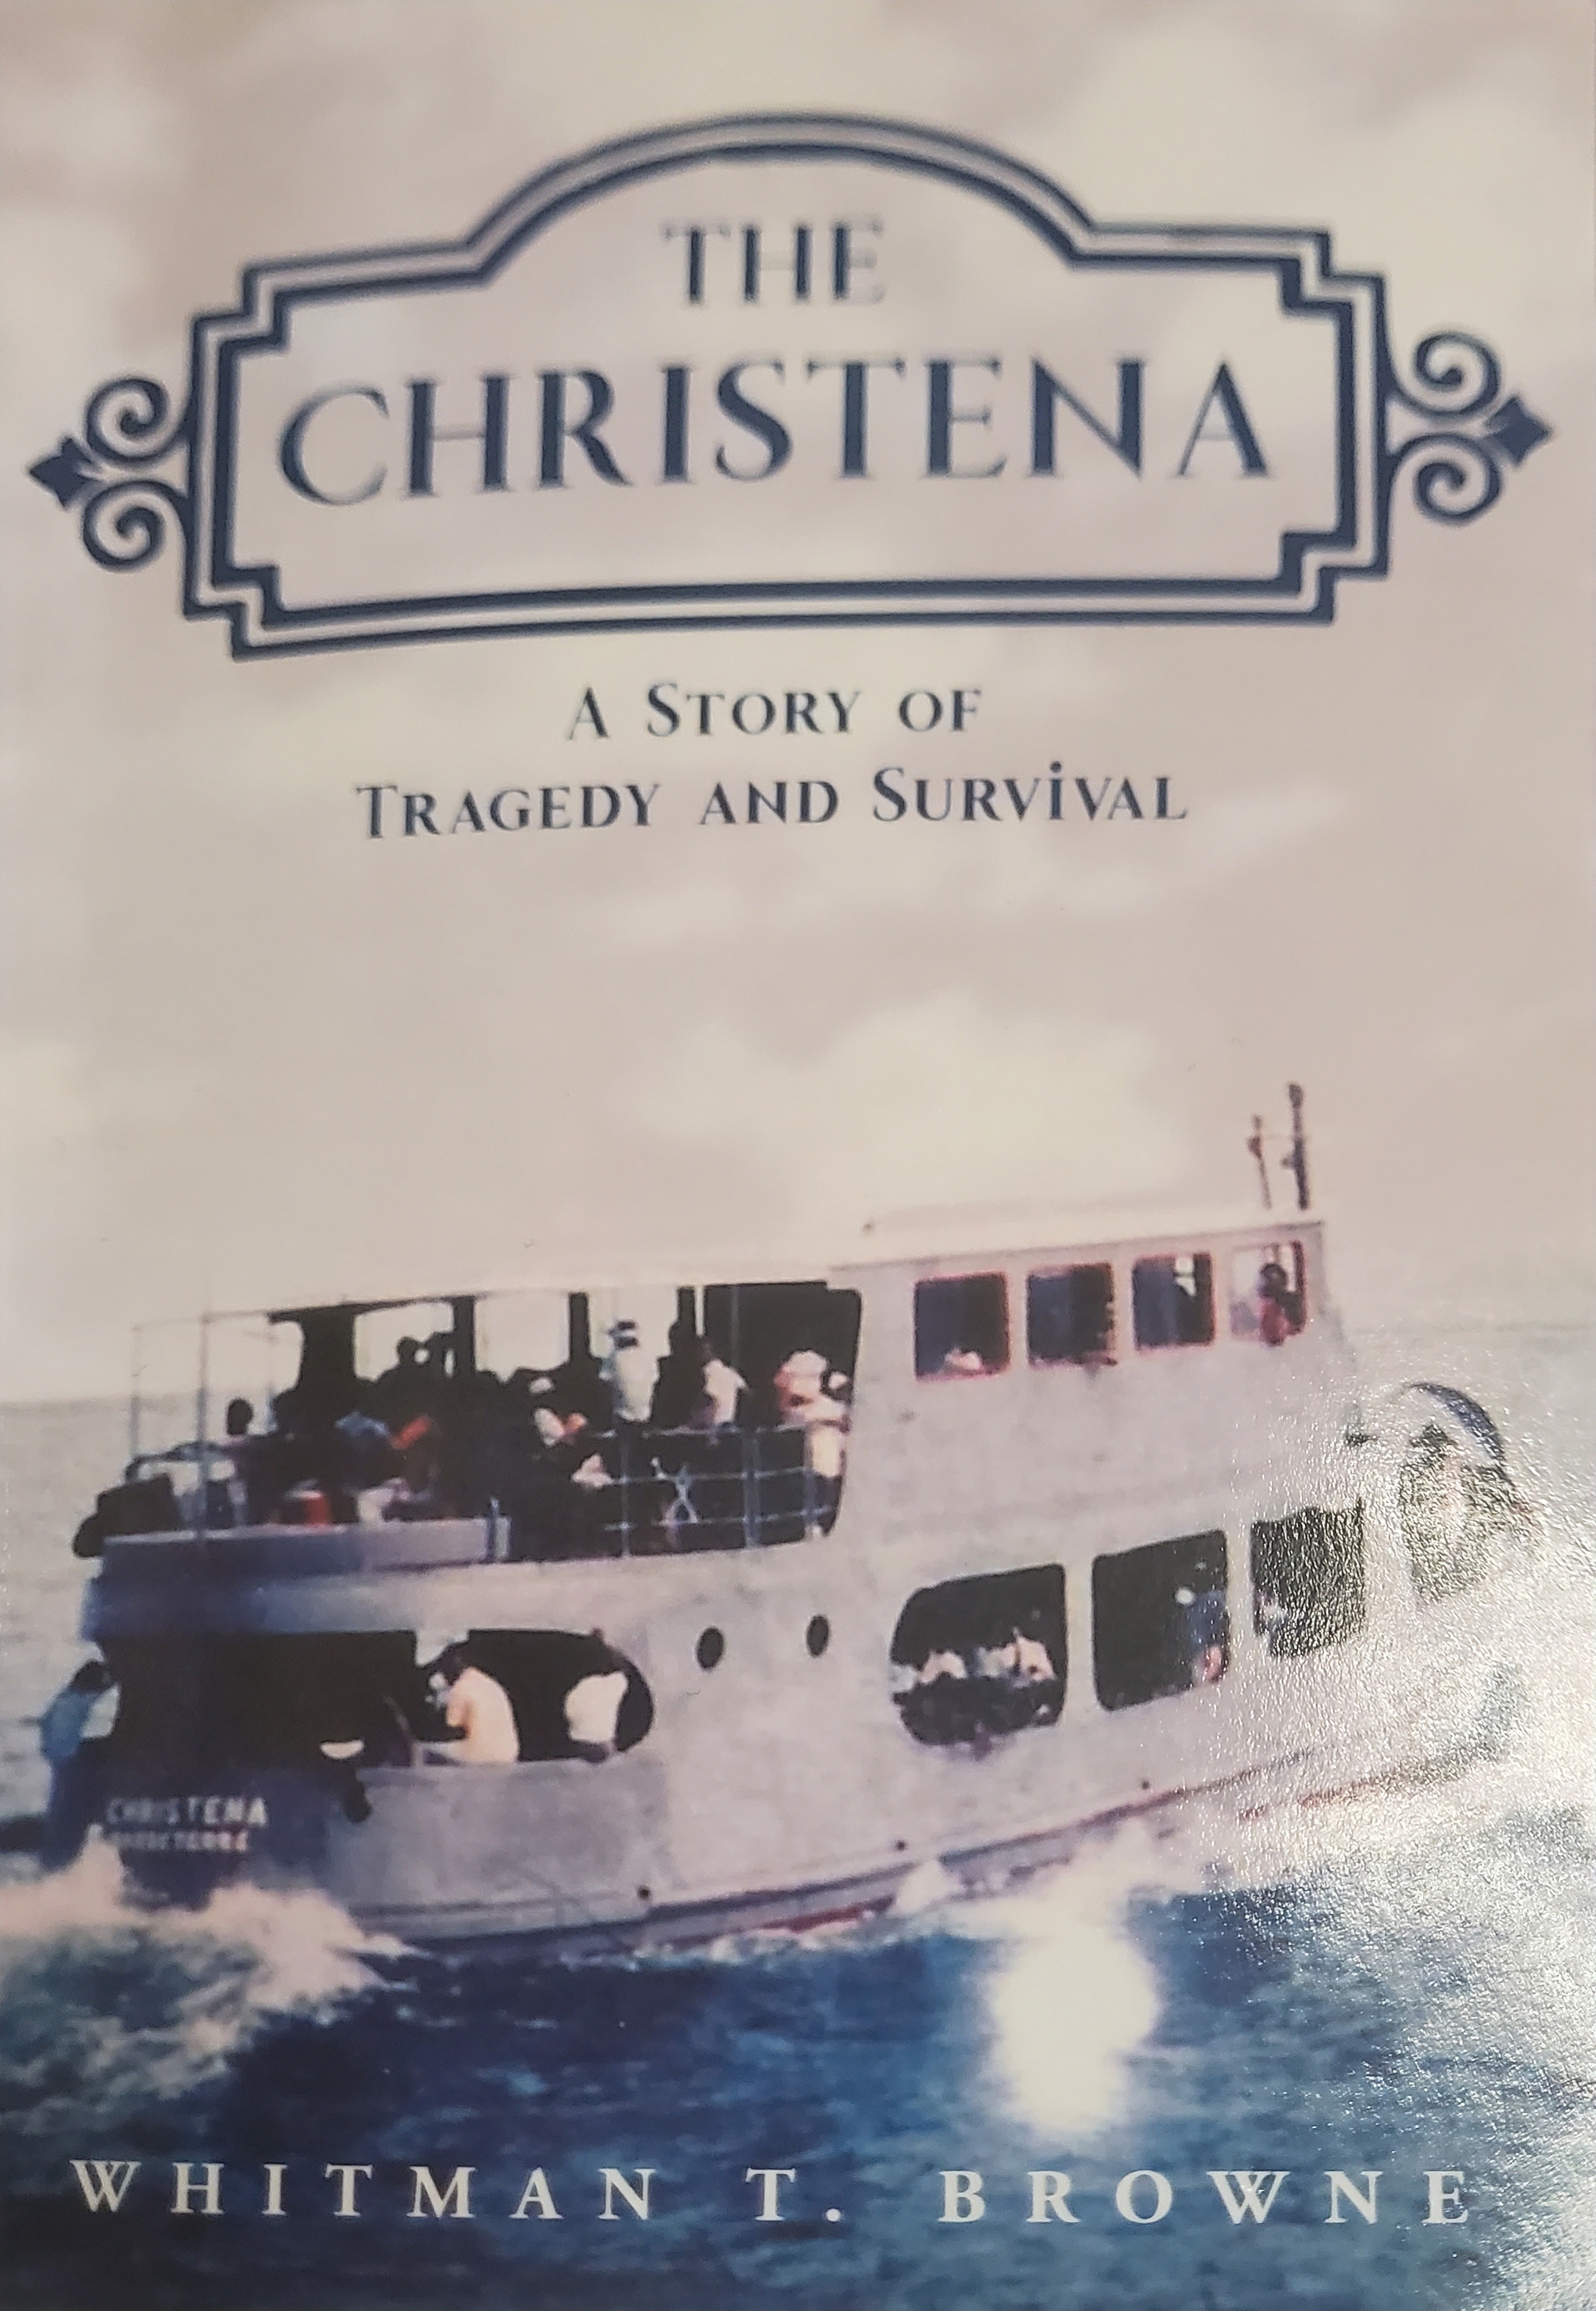 The Christena: A Story of Tragedy and Survival.